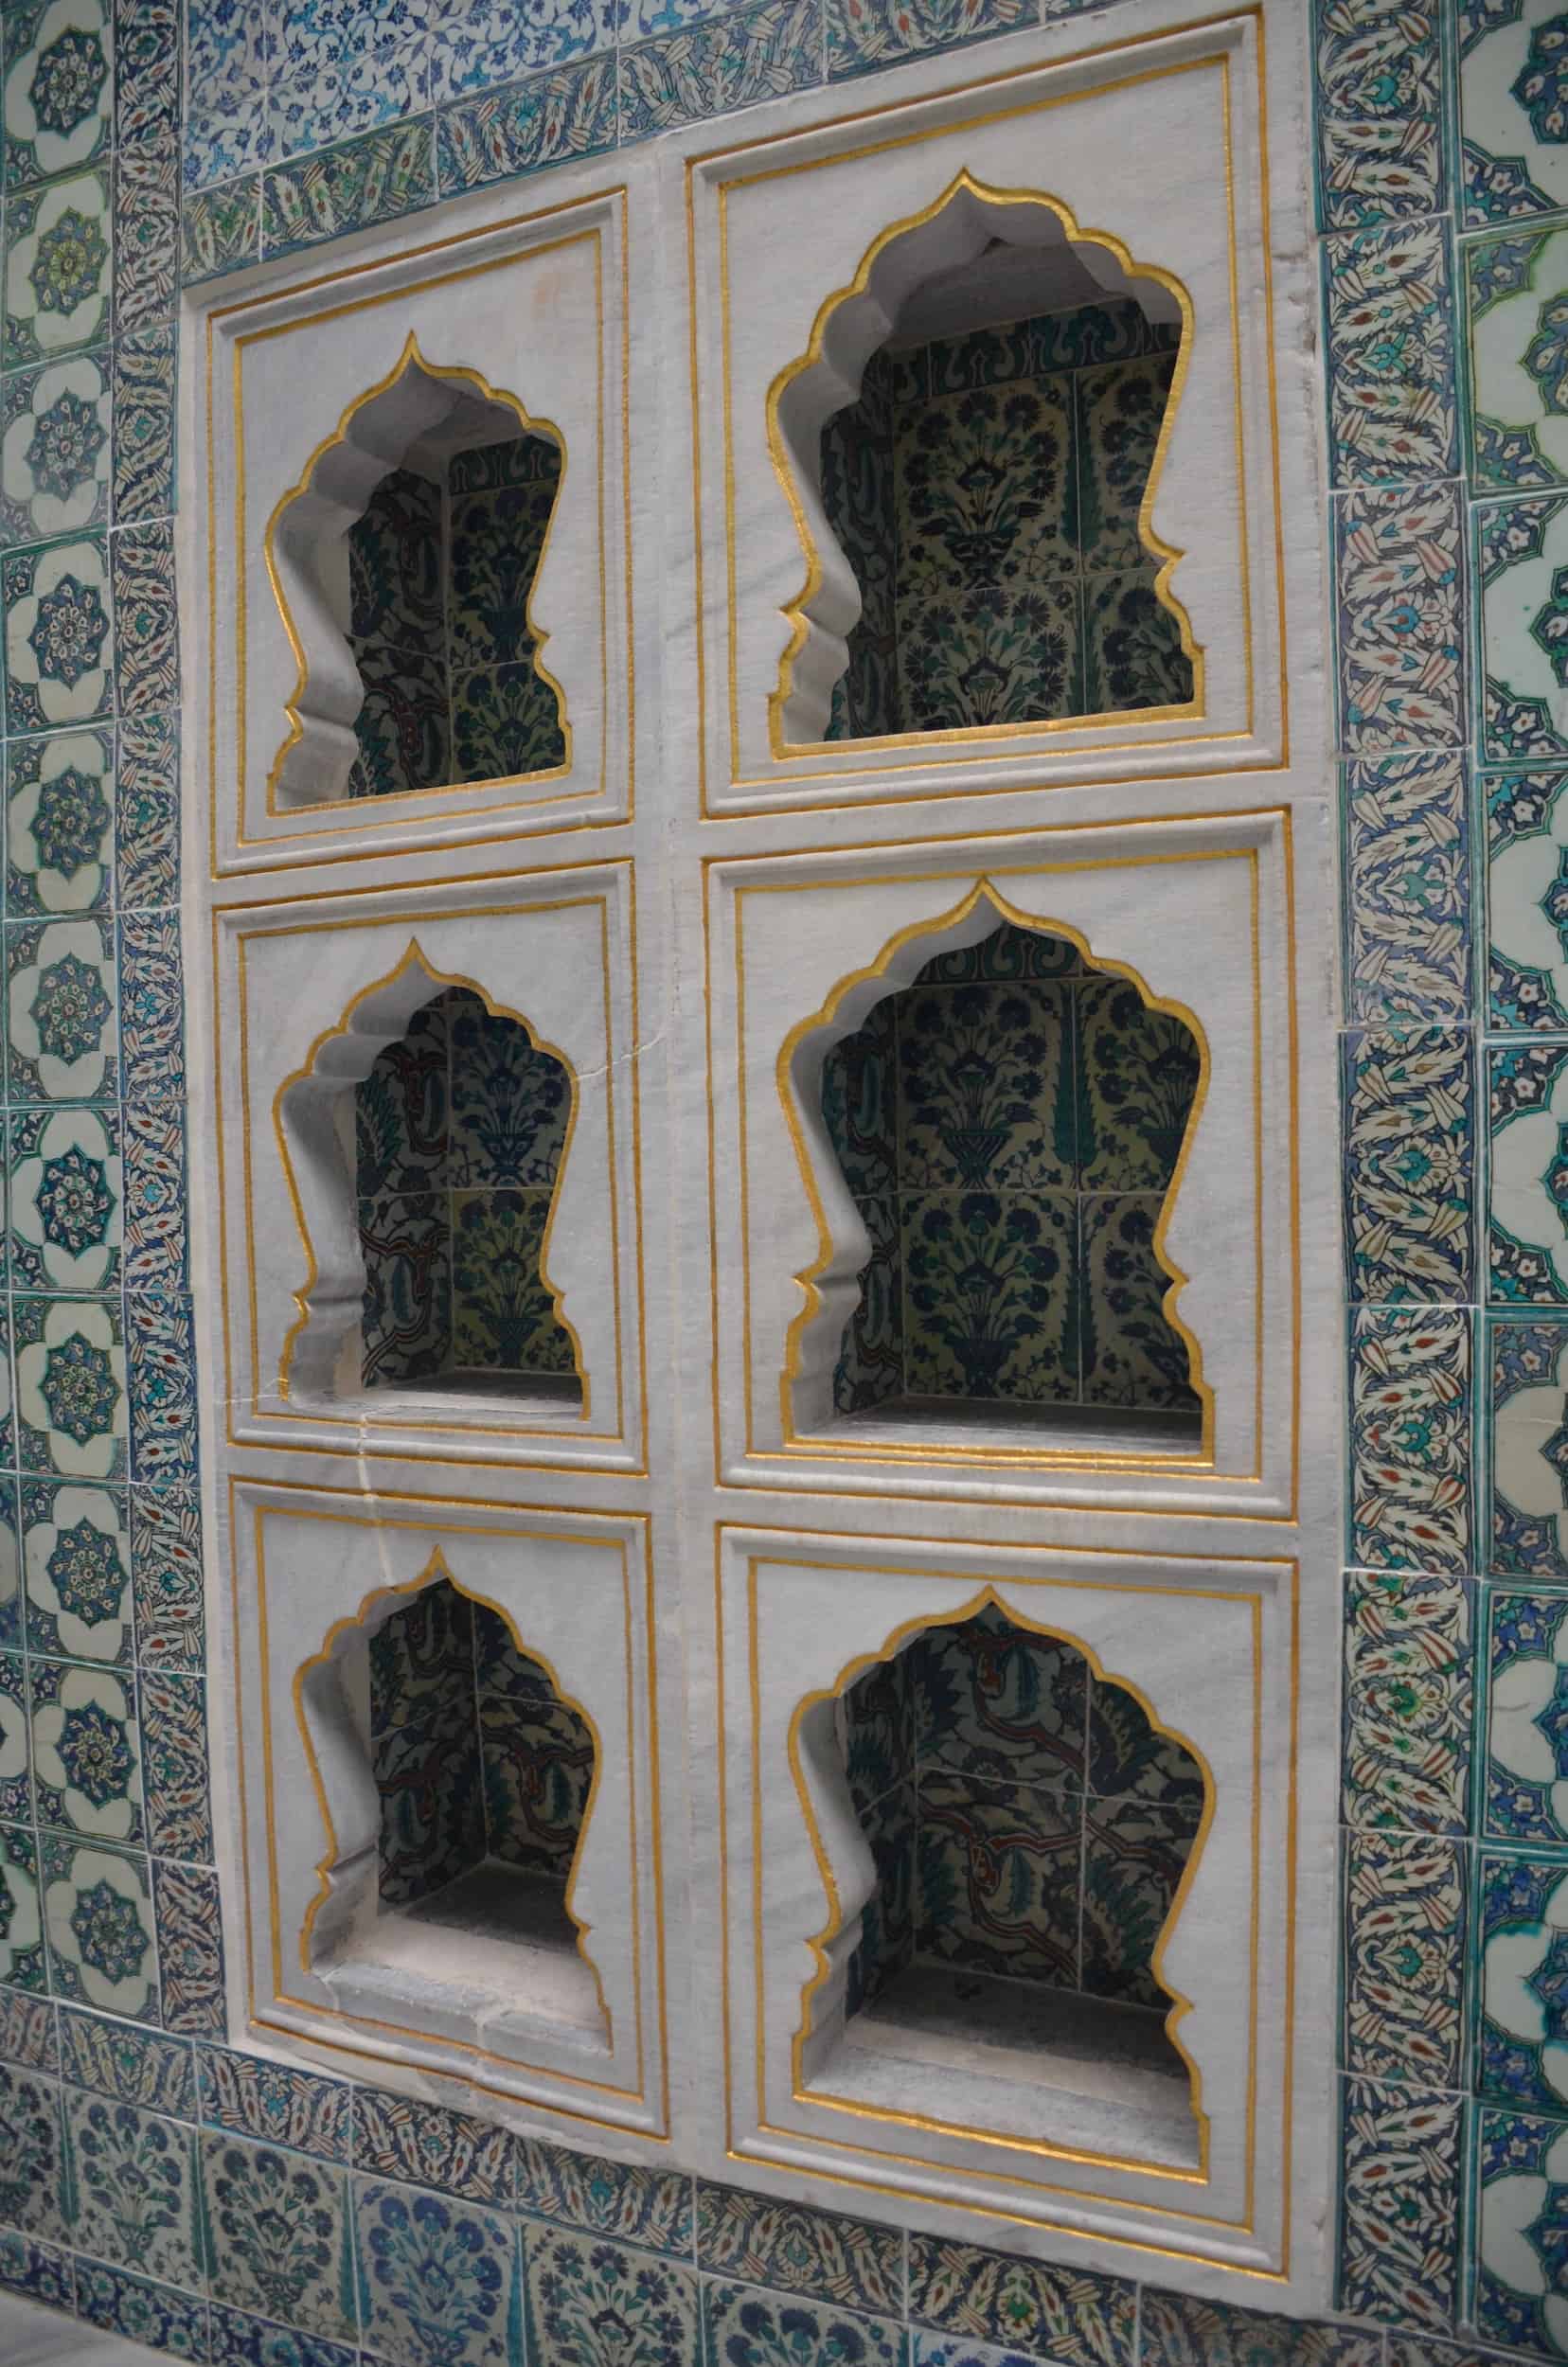 Niches in the Hall with the Fountain